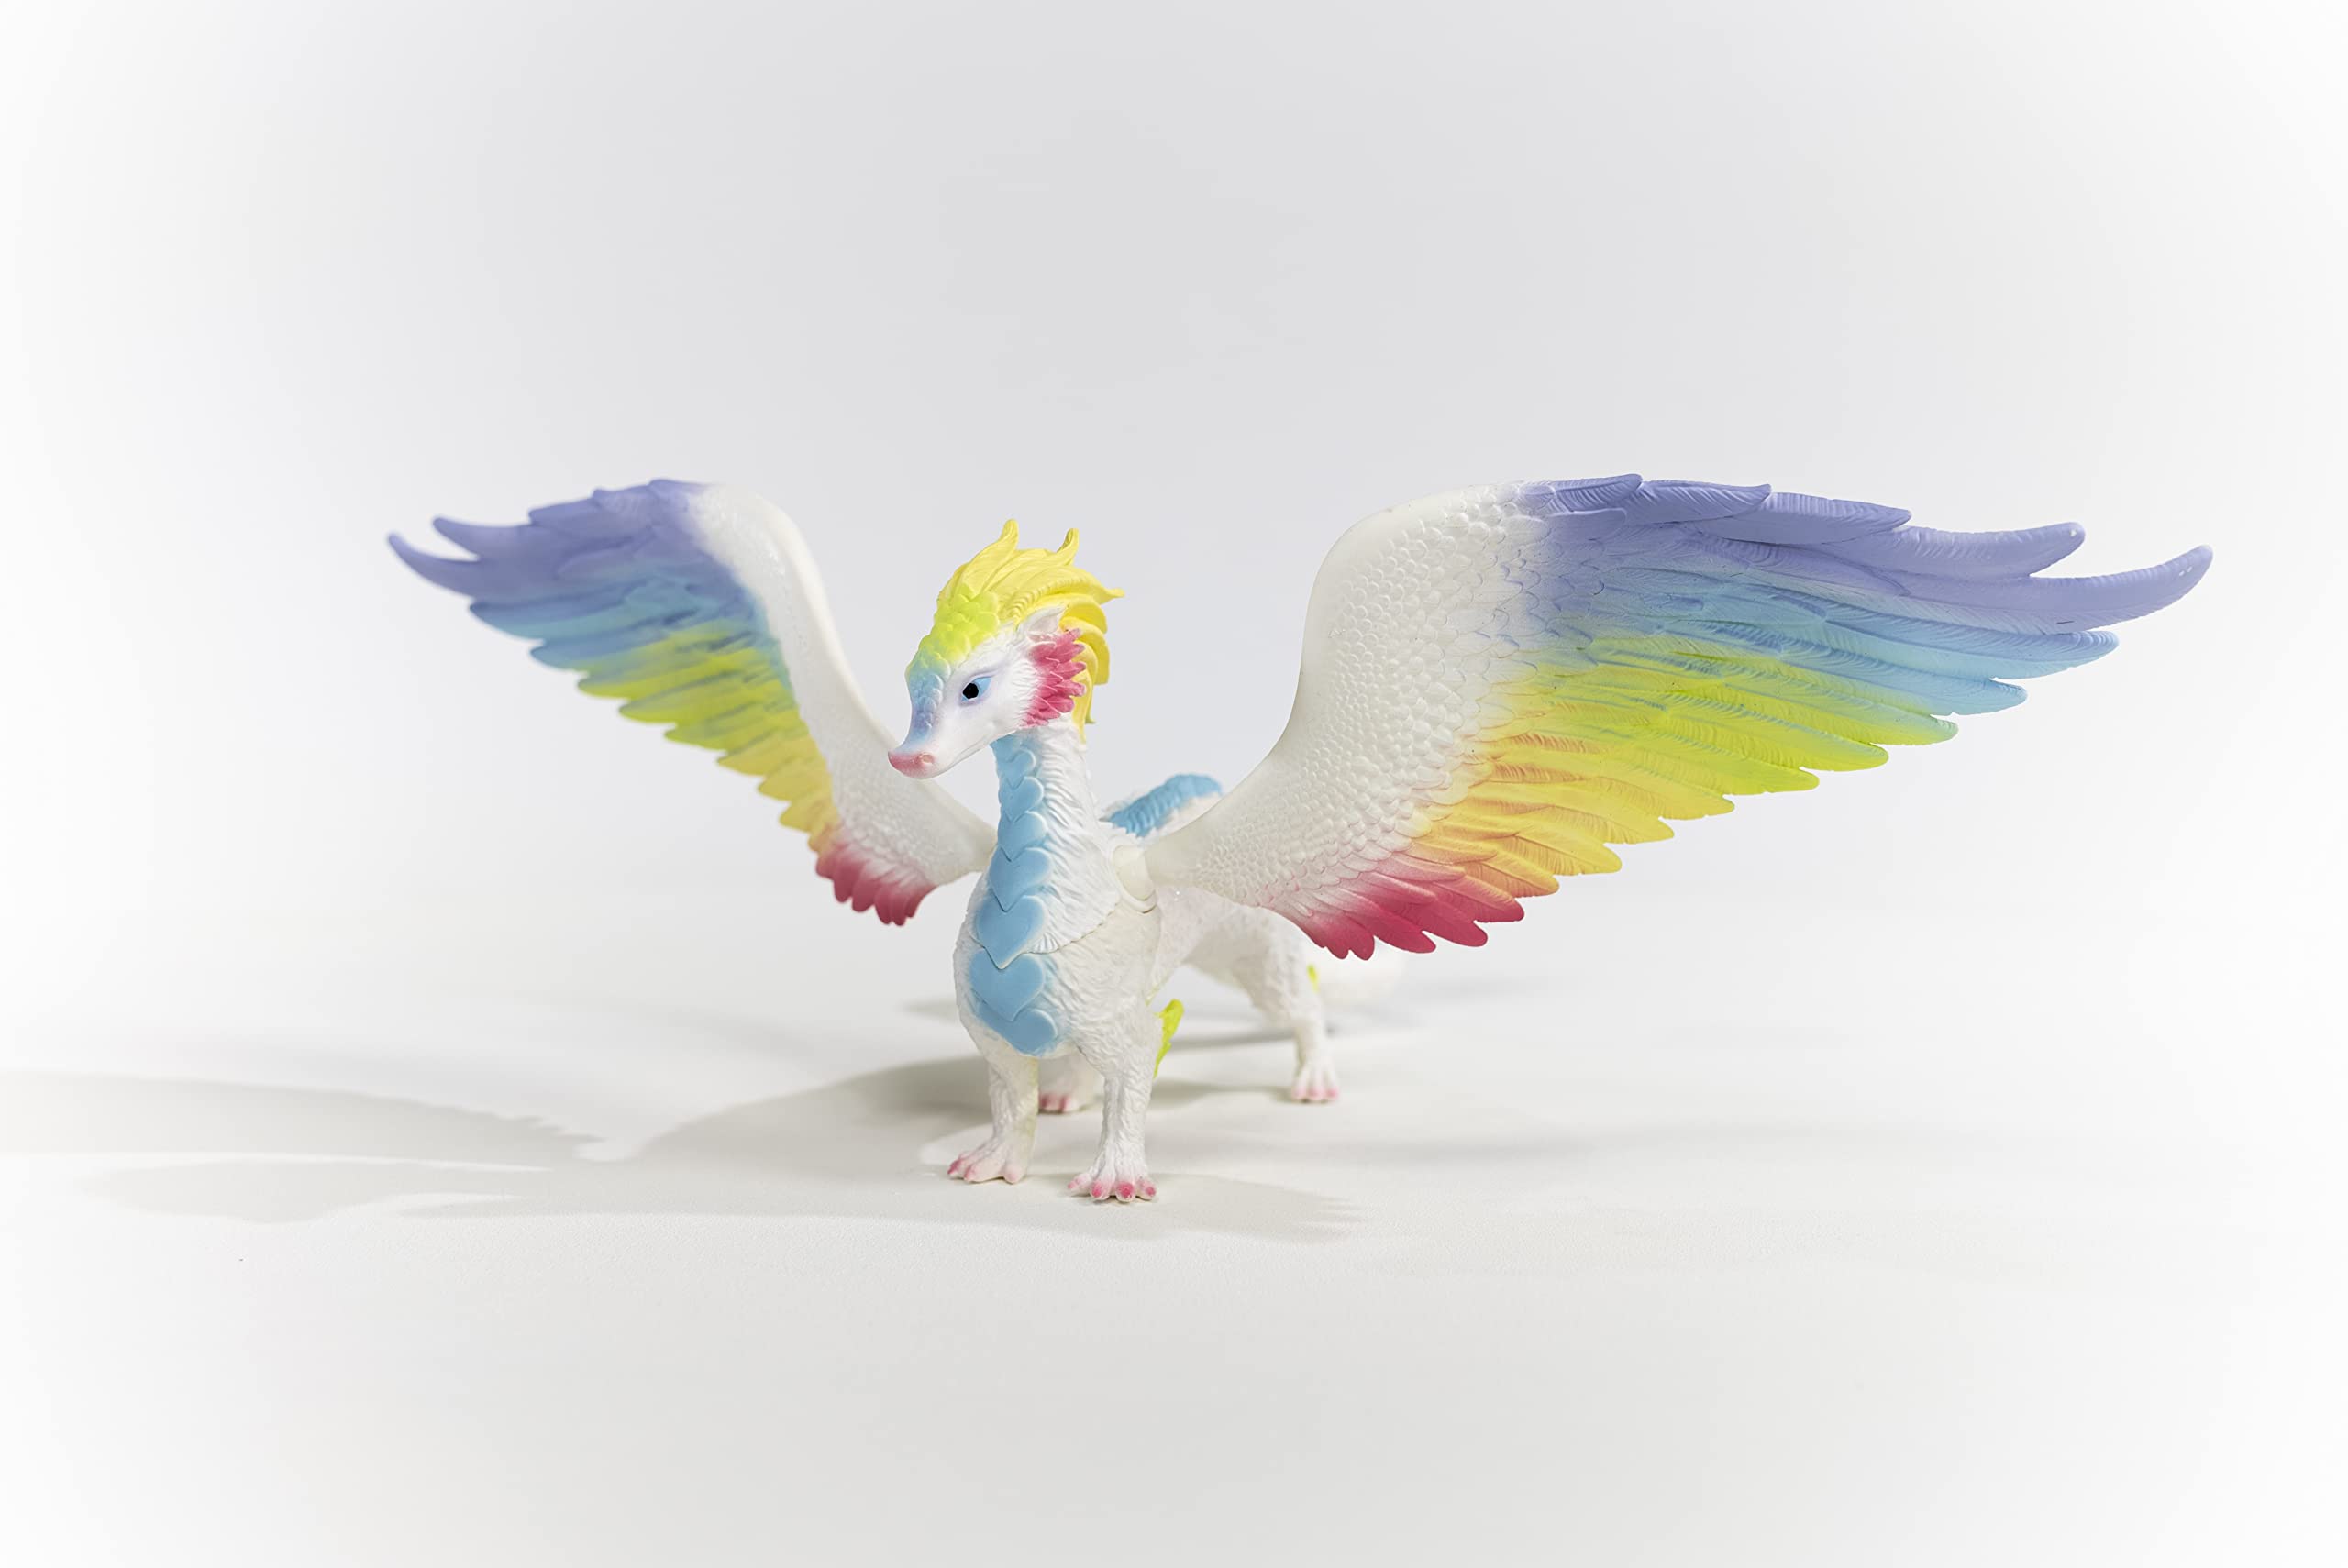 Schleich bayala, Mythical Creatures Toys for Kids, Rainbow Dragon Figurine with Movable Wings, Ages 5+